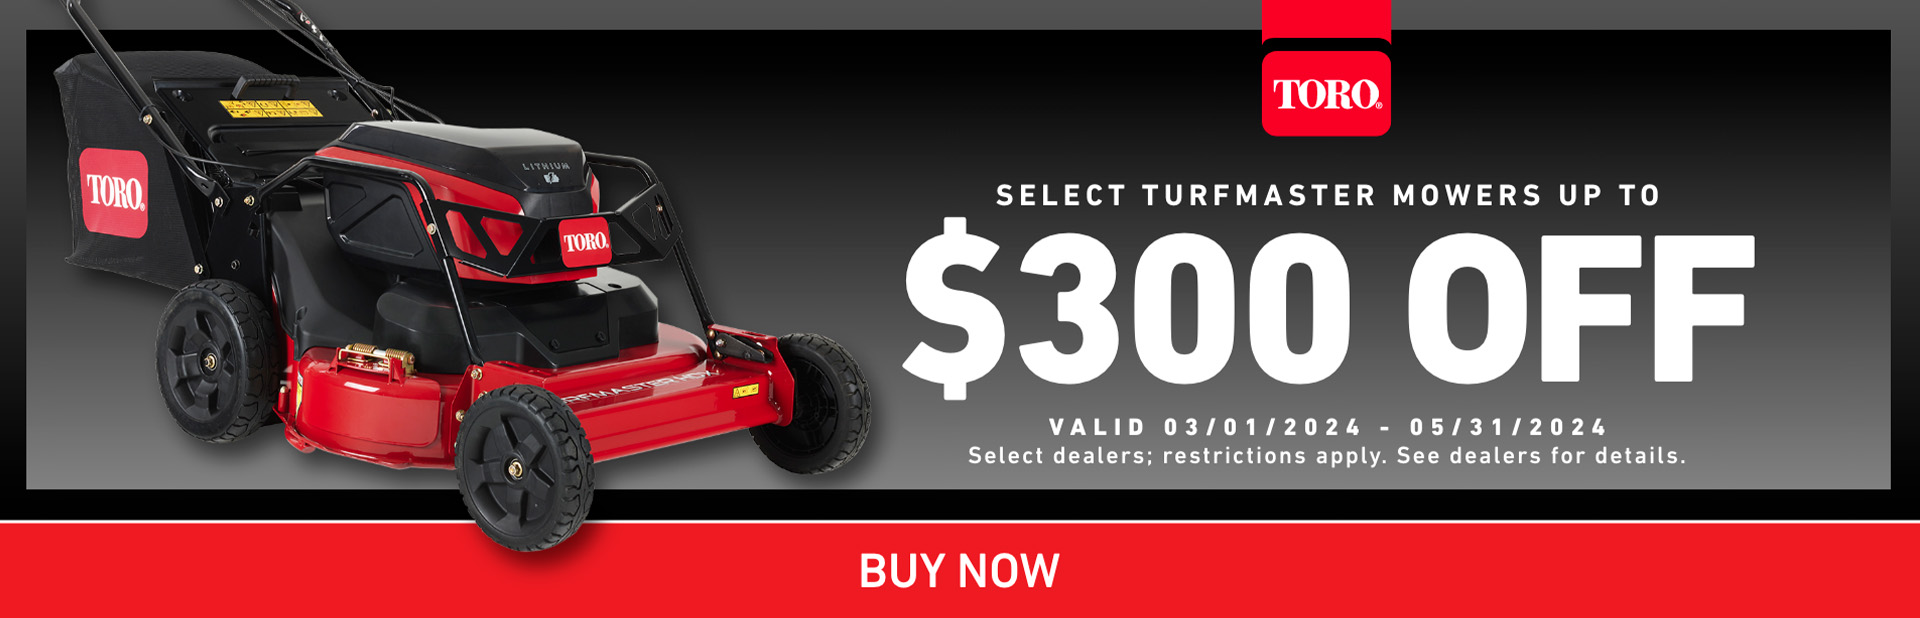 Up to $300 off Select Turfmaster Mowers